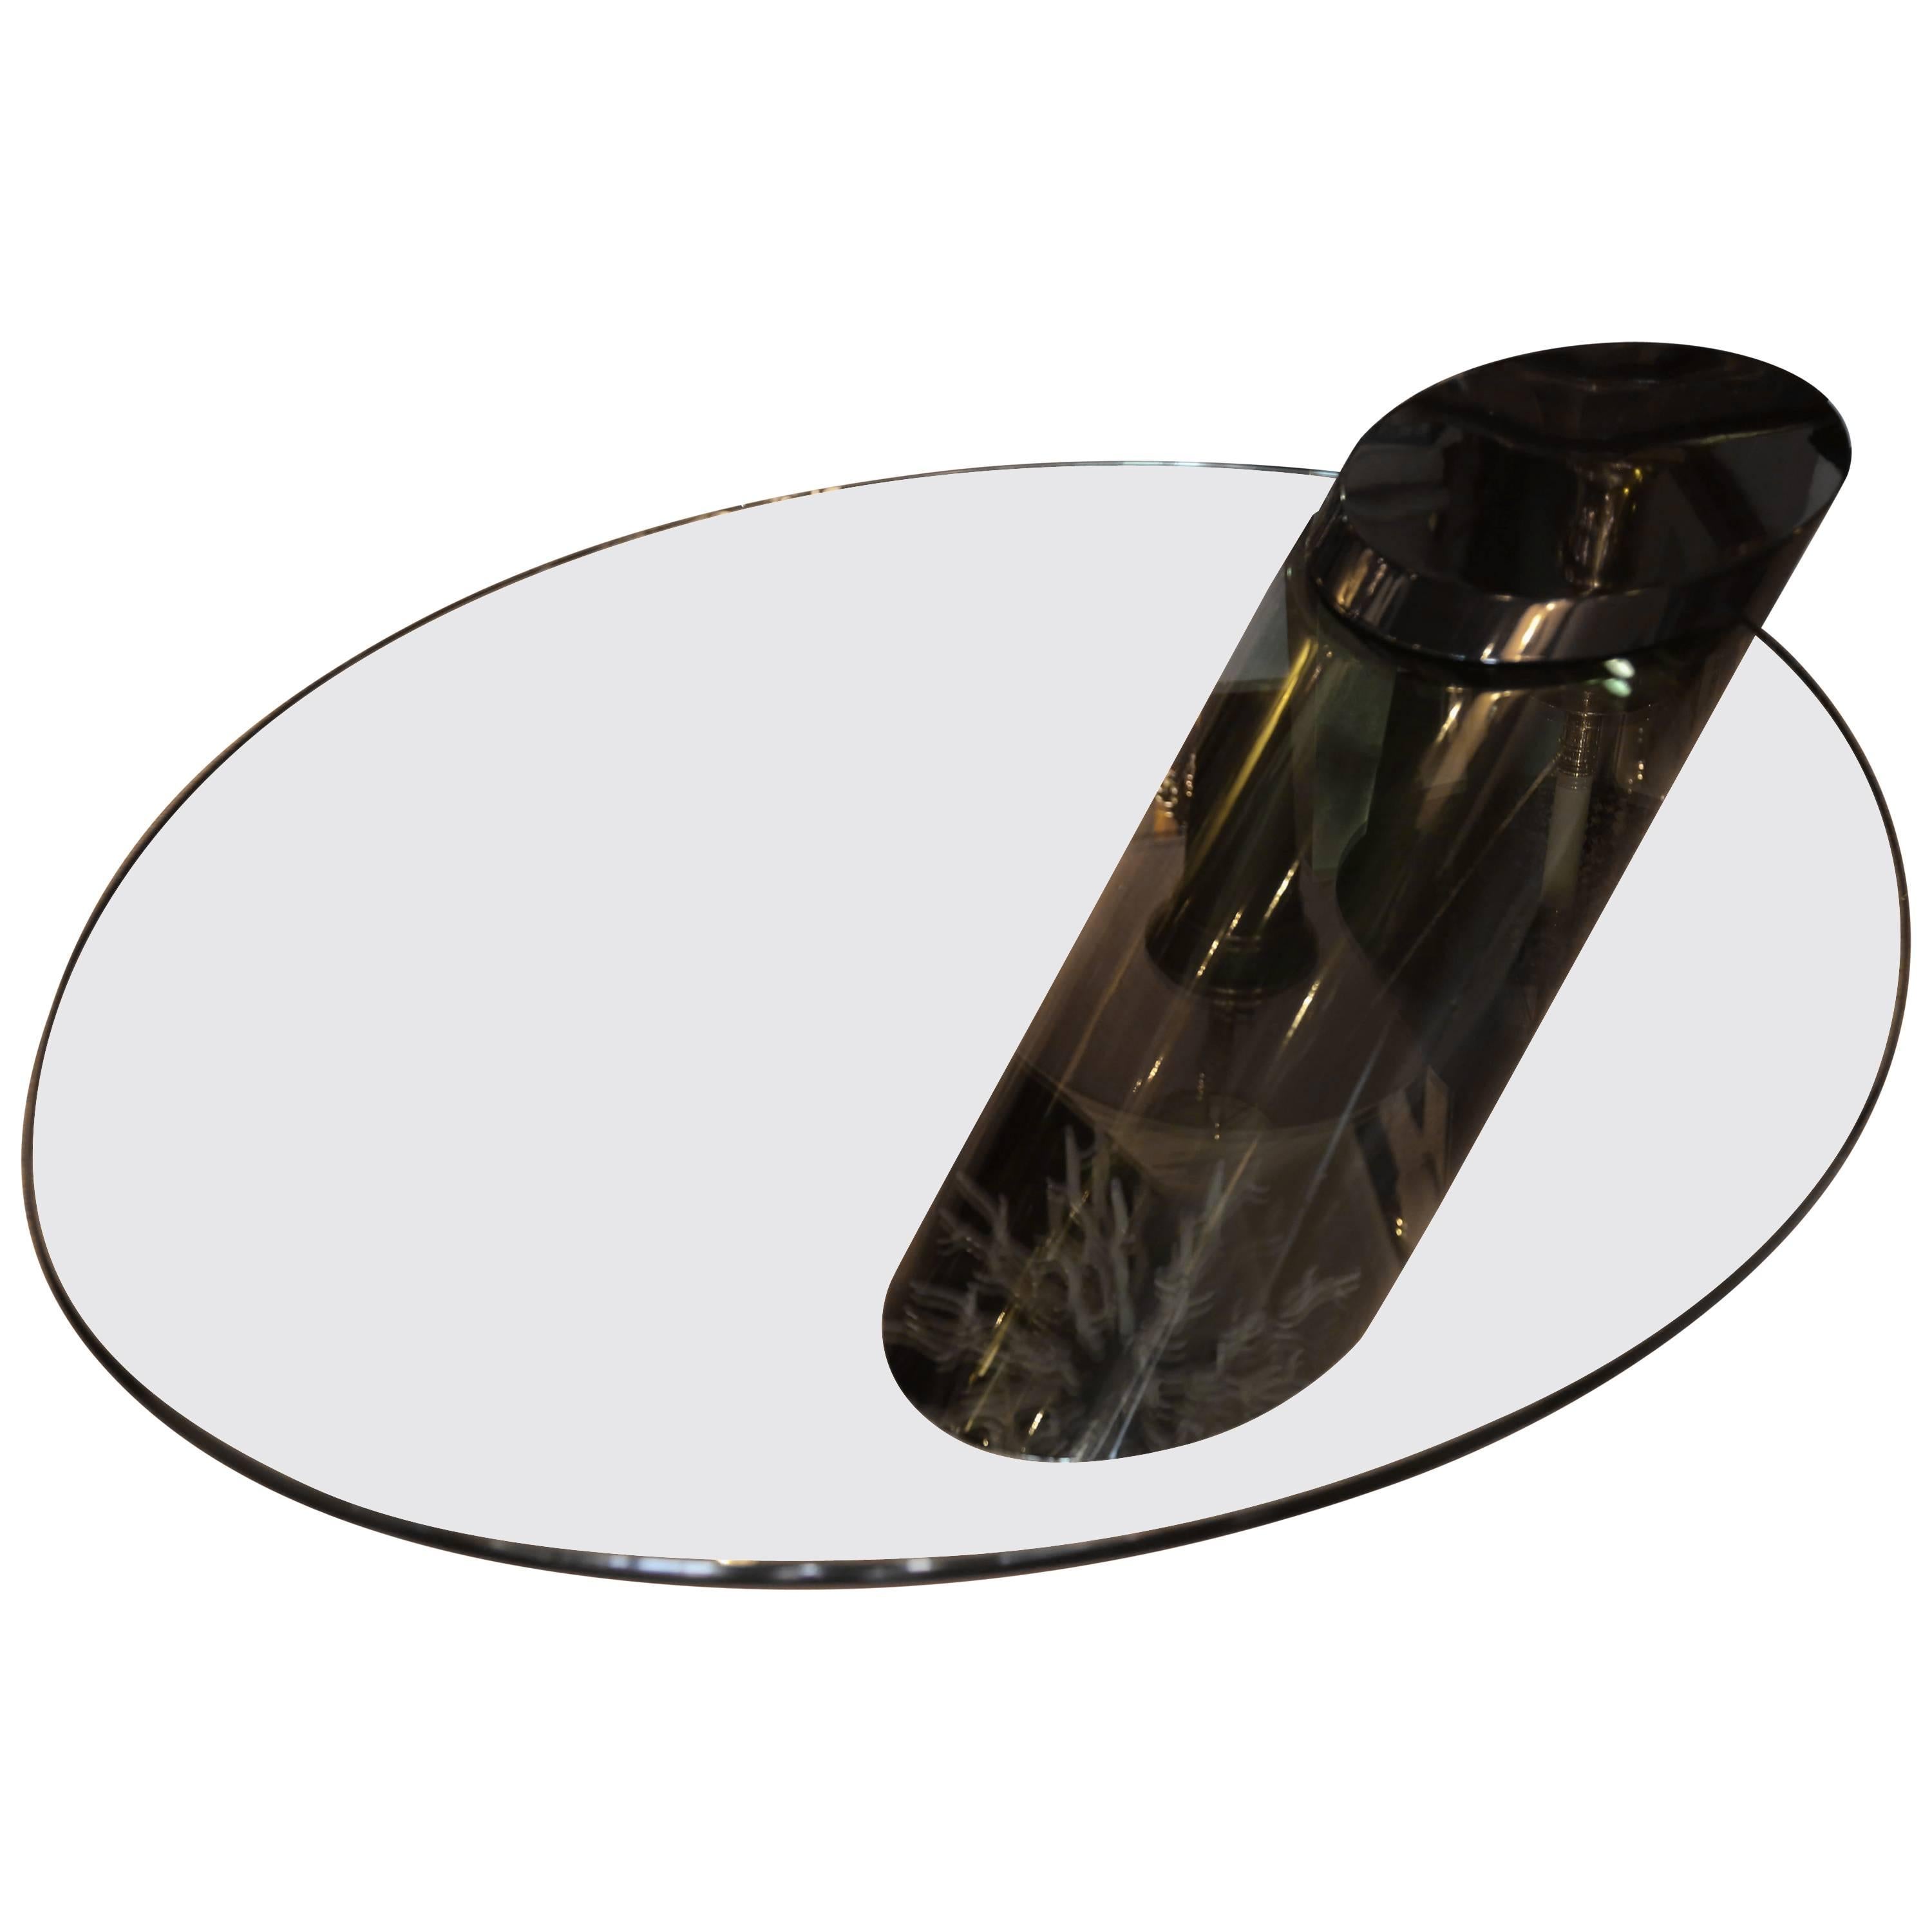 Cantilevered Glass and Black Lacquer " Zephyr" Cocktail Table by Brueton